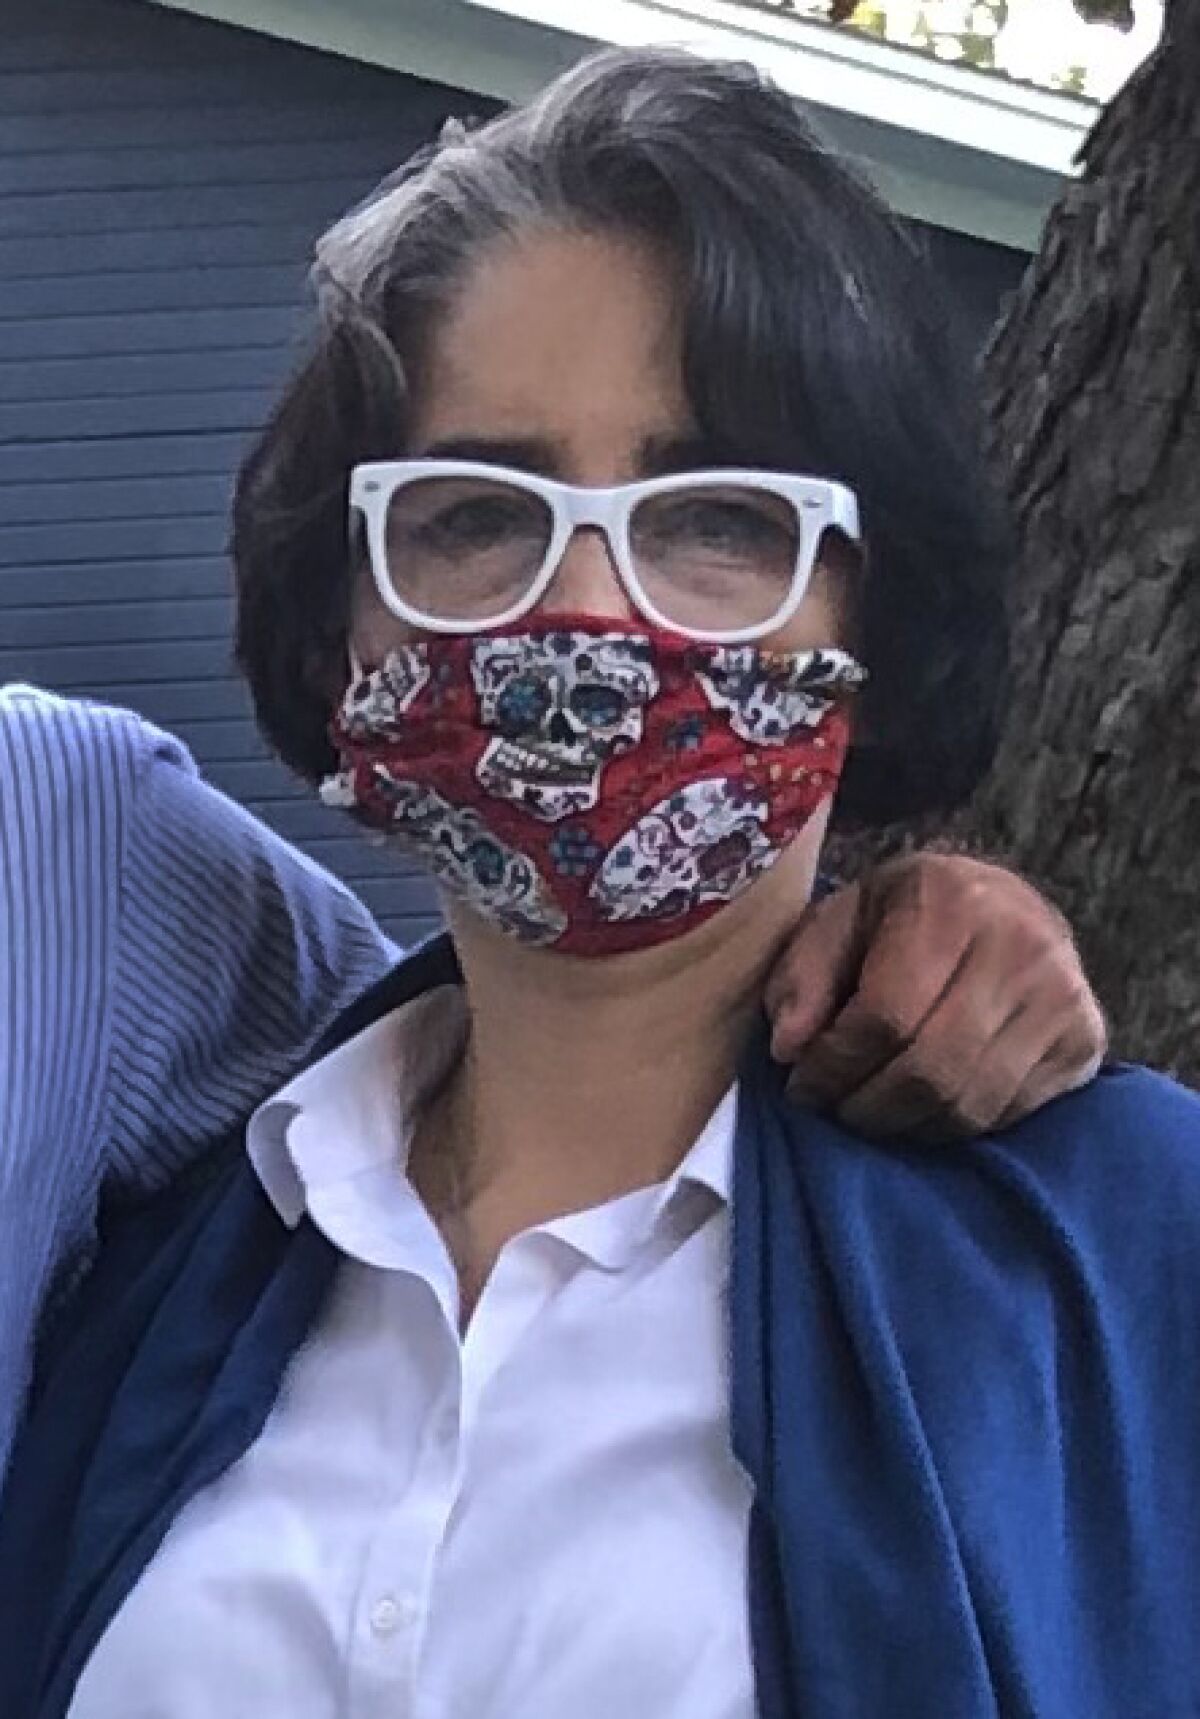 Paloma Diaz, pictured wearing a protective mask, directs Latino American studies at the University of Texas in Austin.